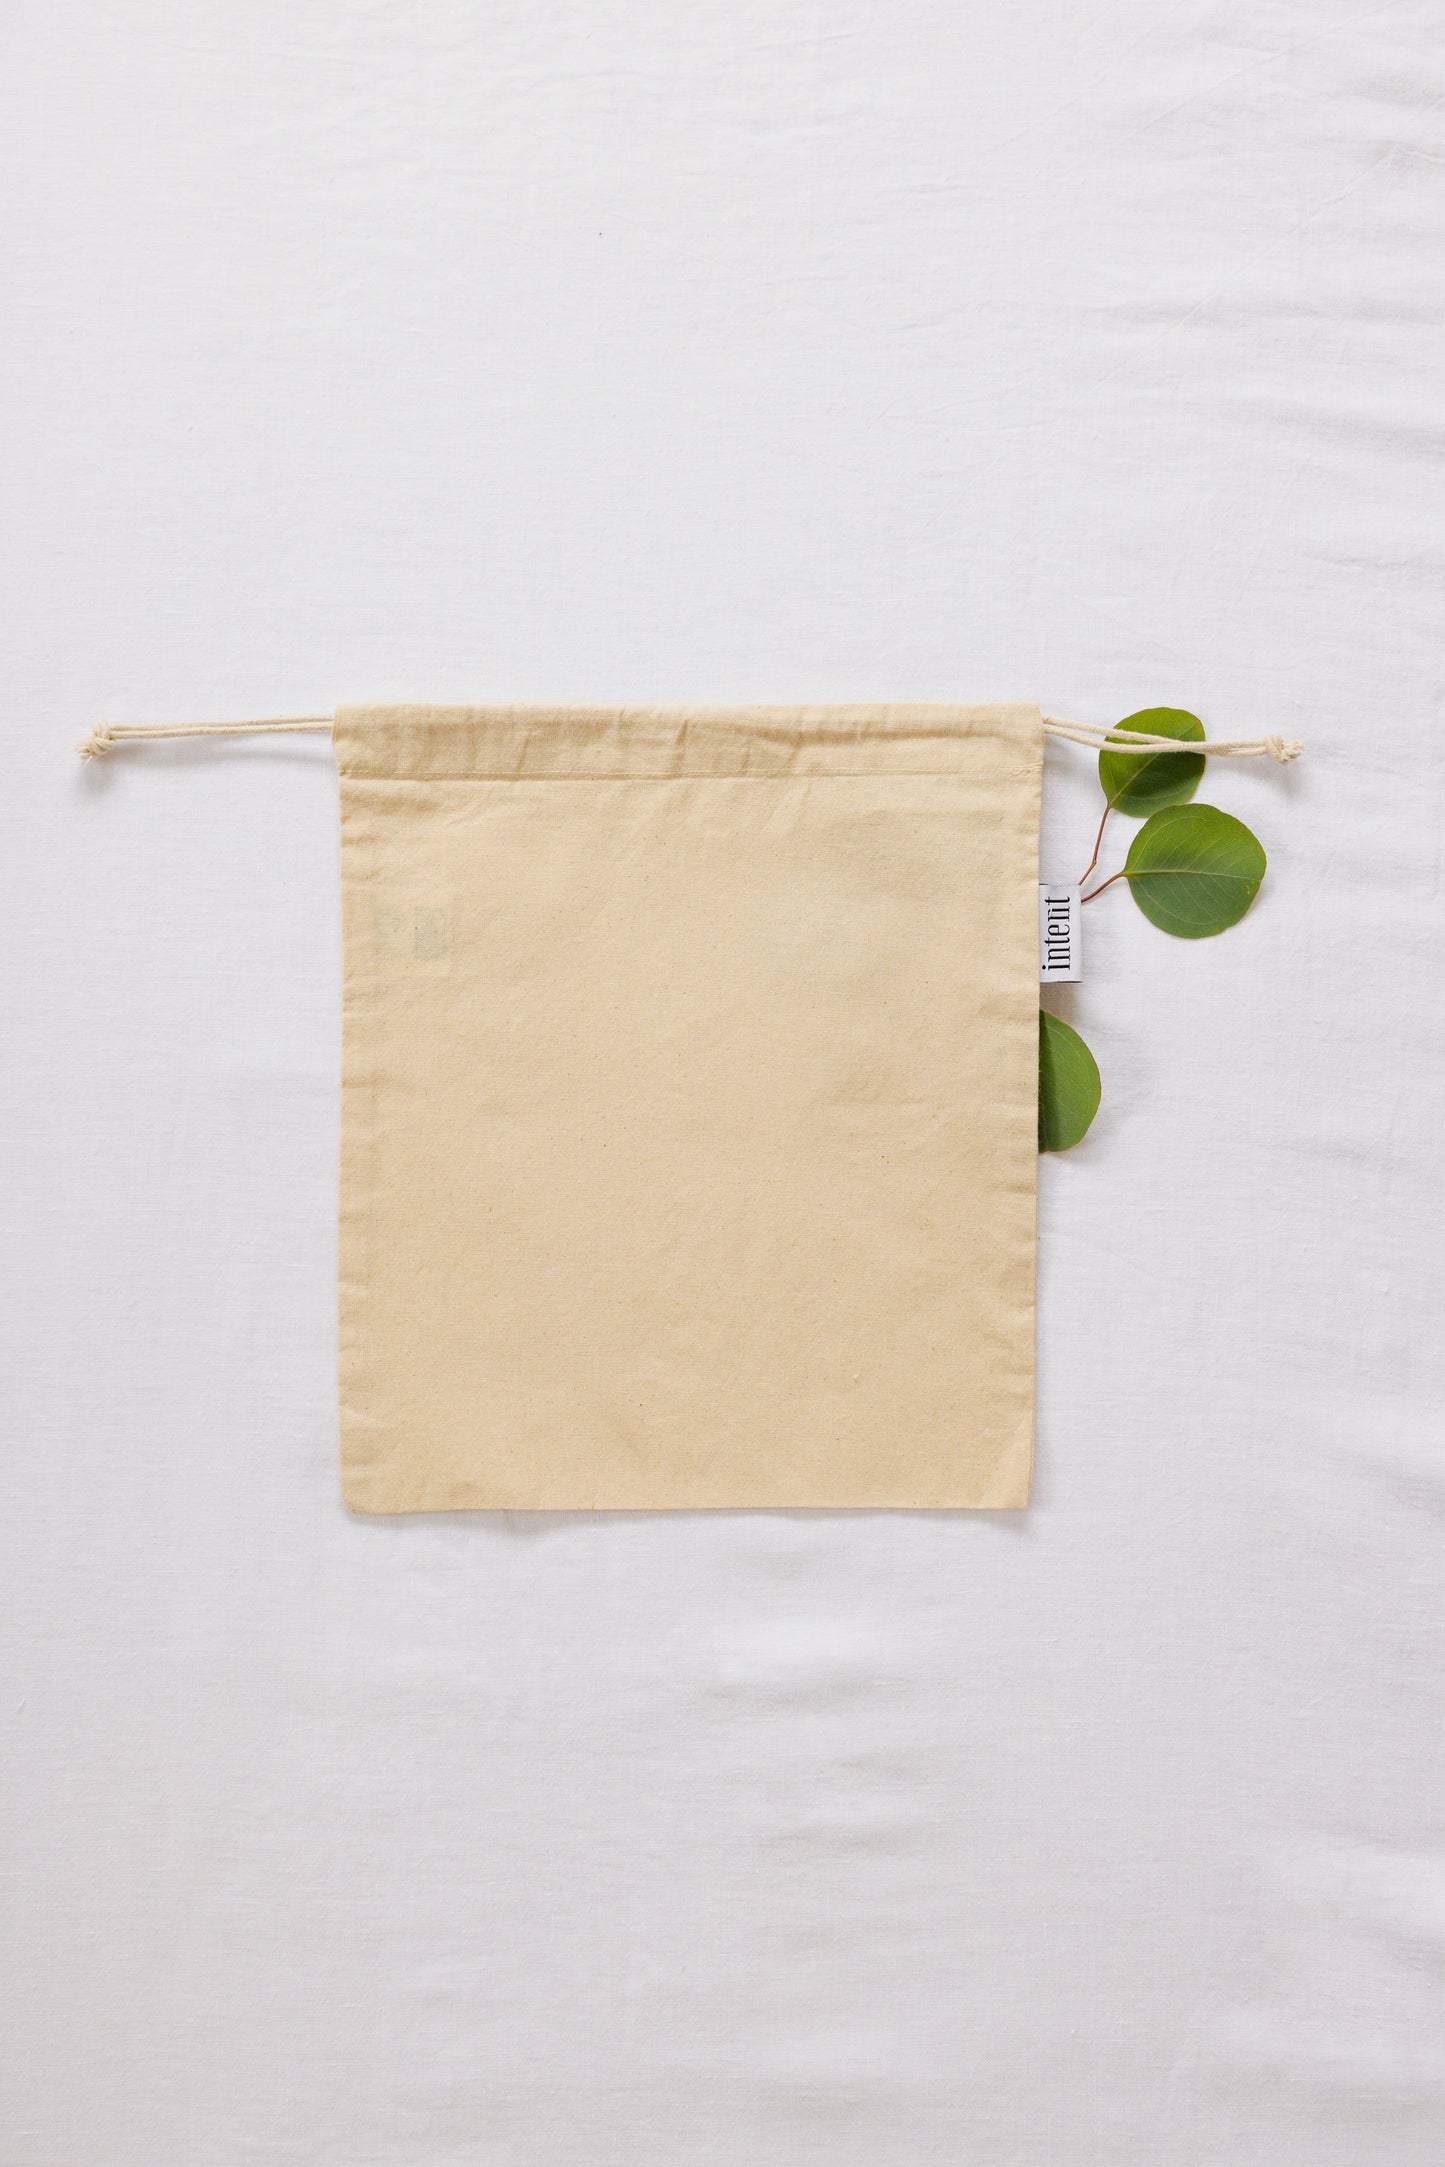 organic cotton and fair trade certified reusable bulk bag use: great for bulk items such as rice, nuts, grains, etc.  size: medium (12 inches high x 10 inches wide)